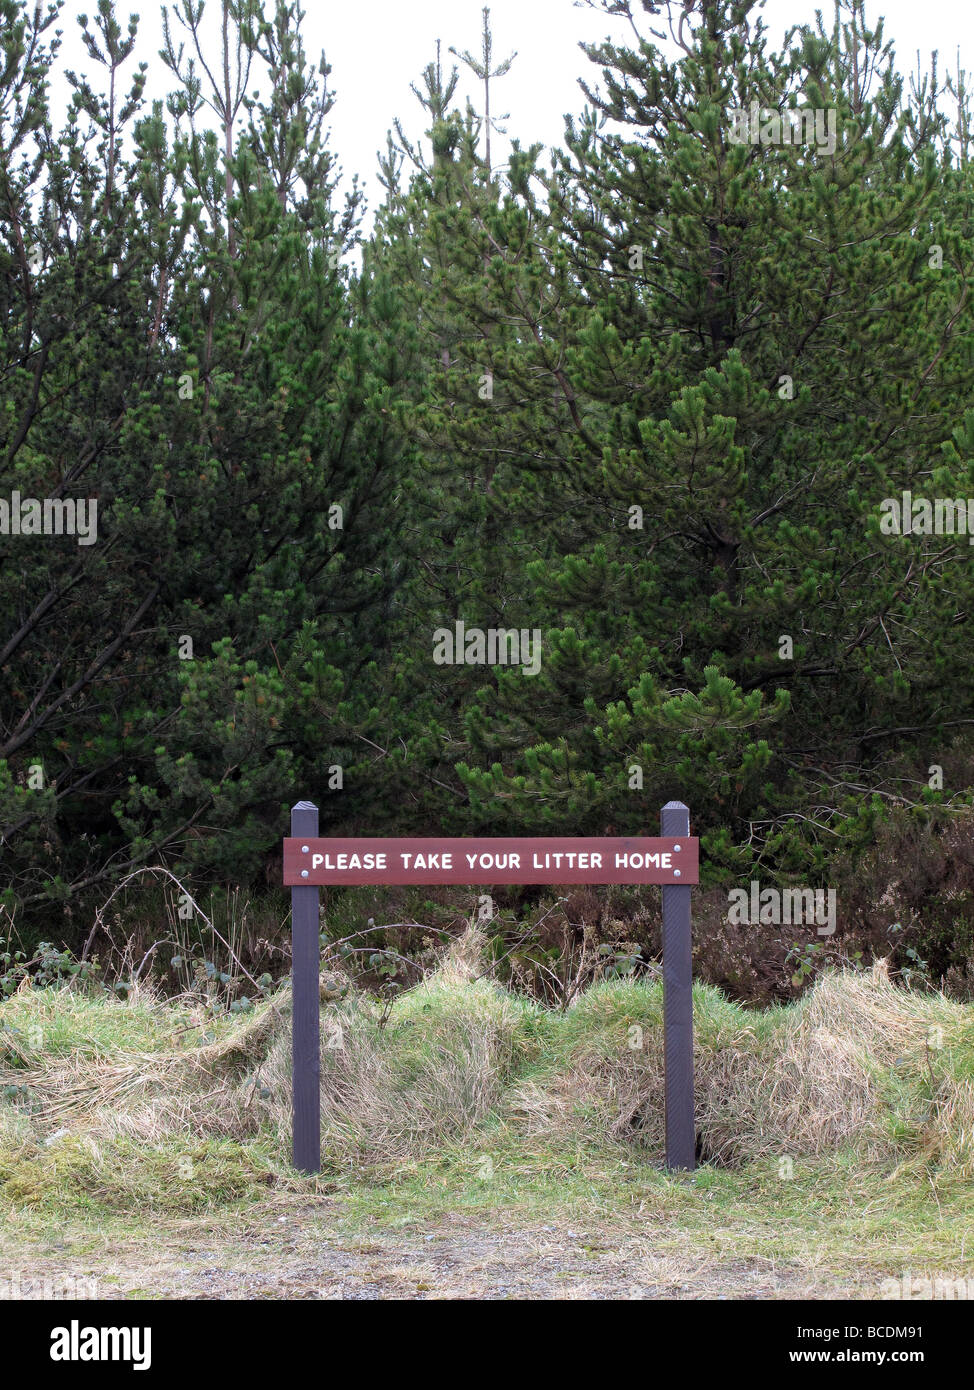 A litter sign in the Slieve Bloom Mountains Portlaoise Ireland Stock Photo